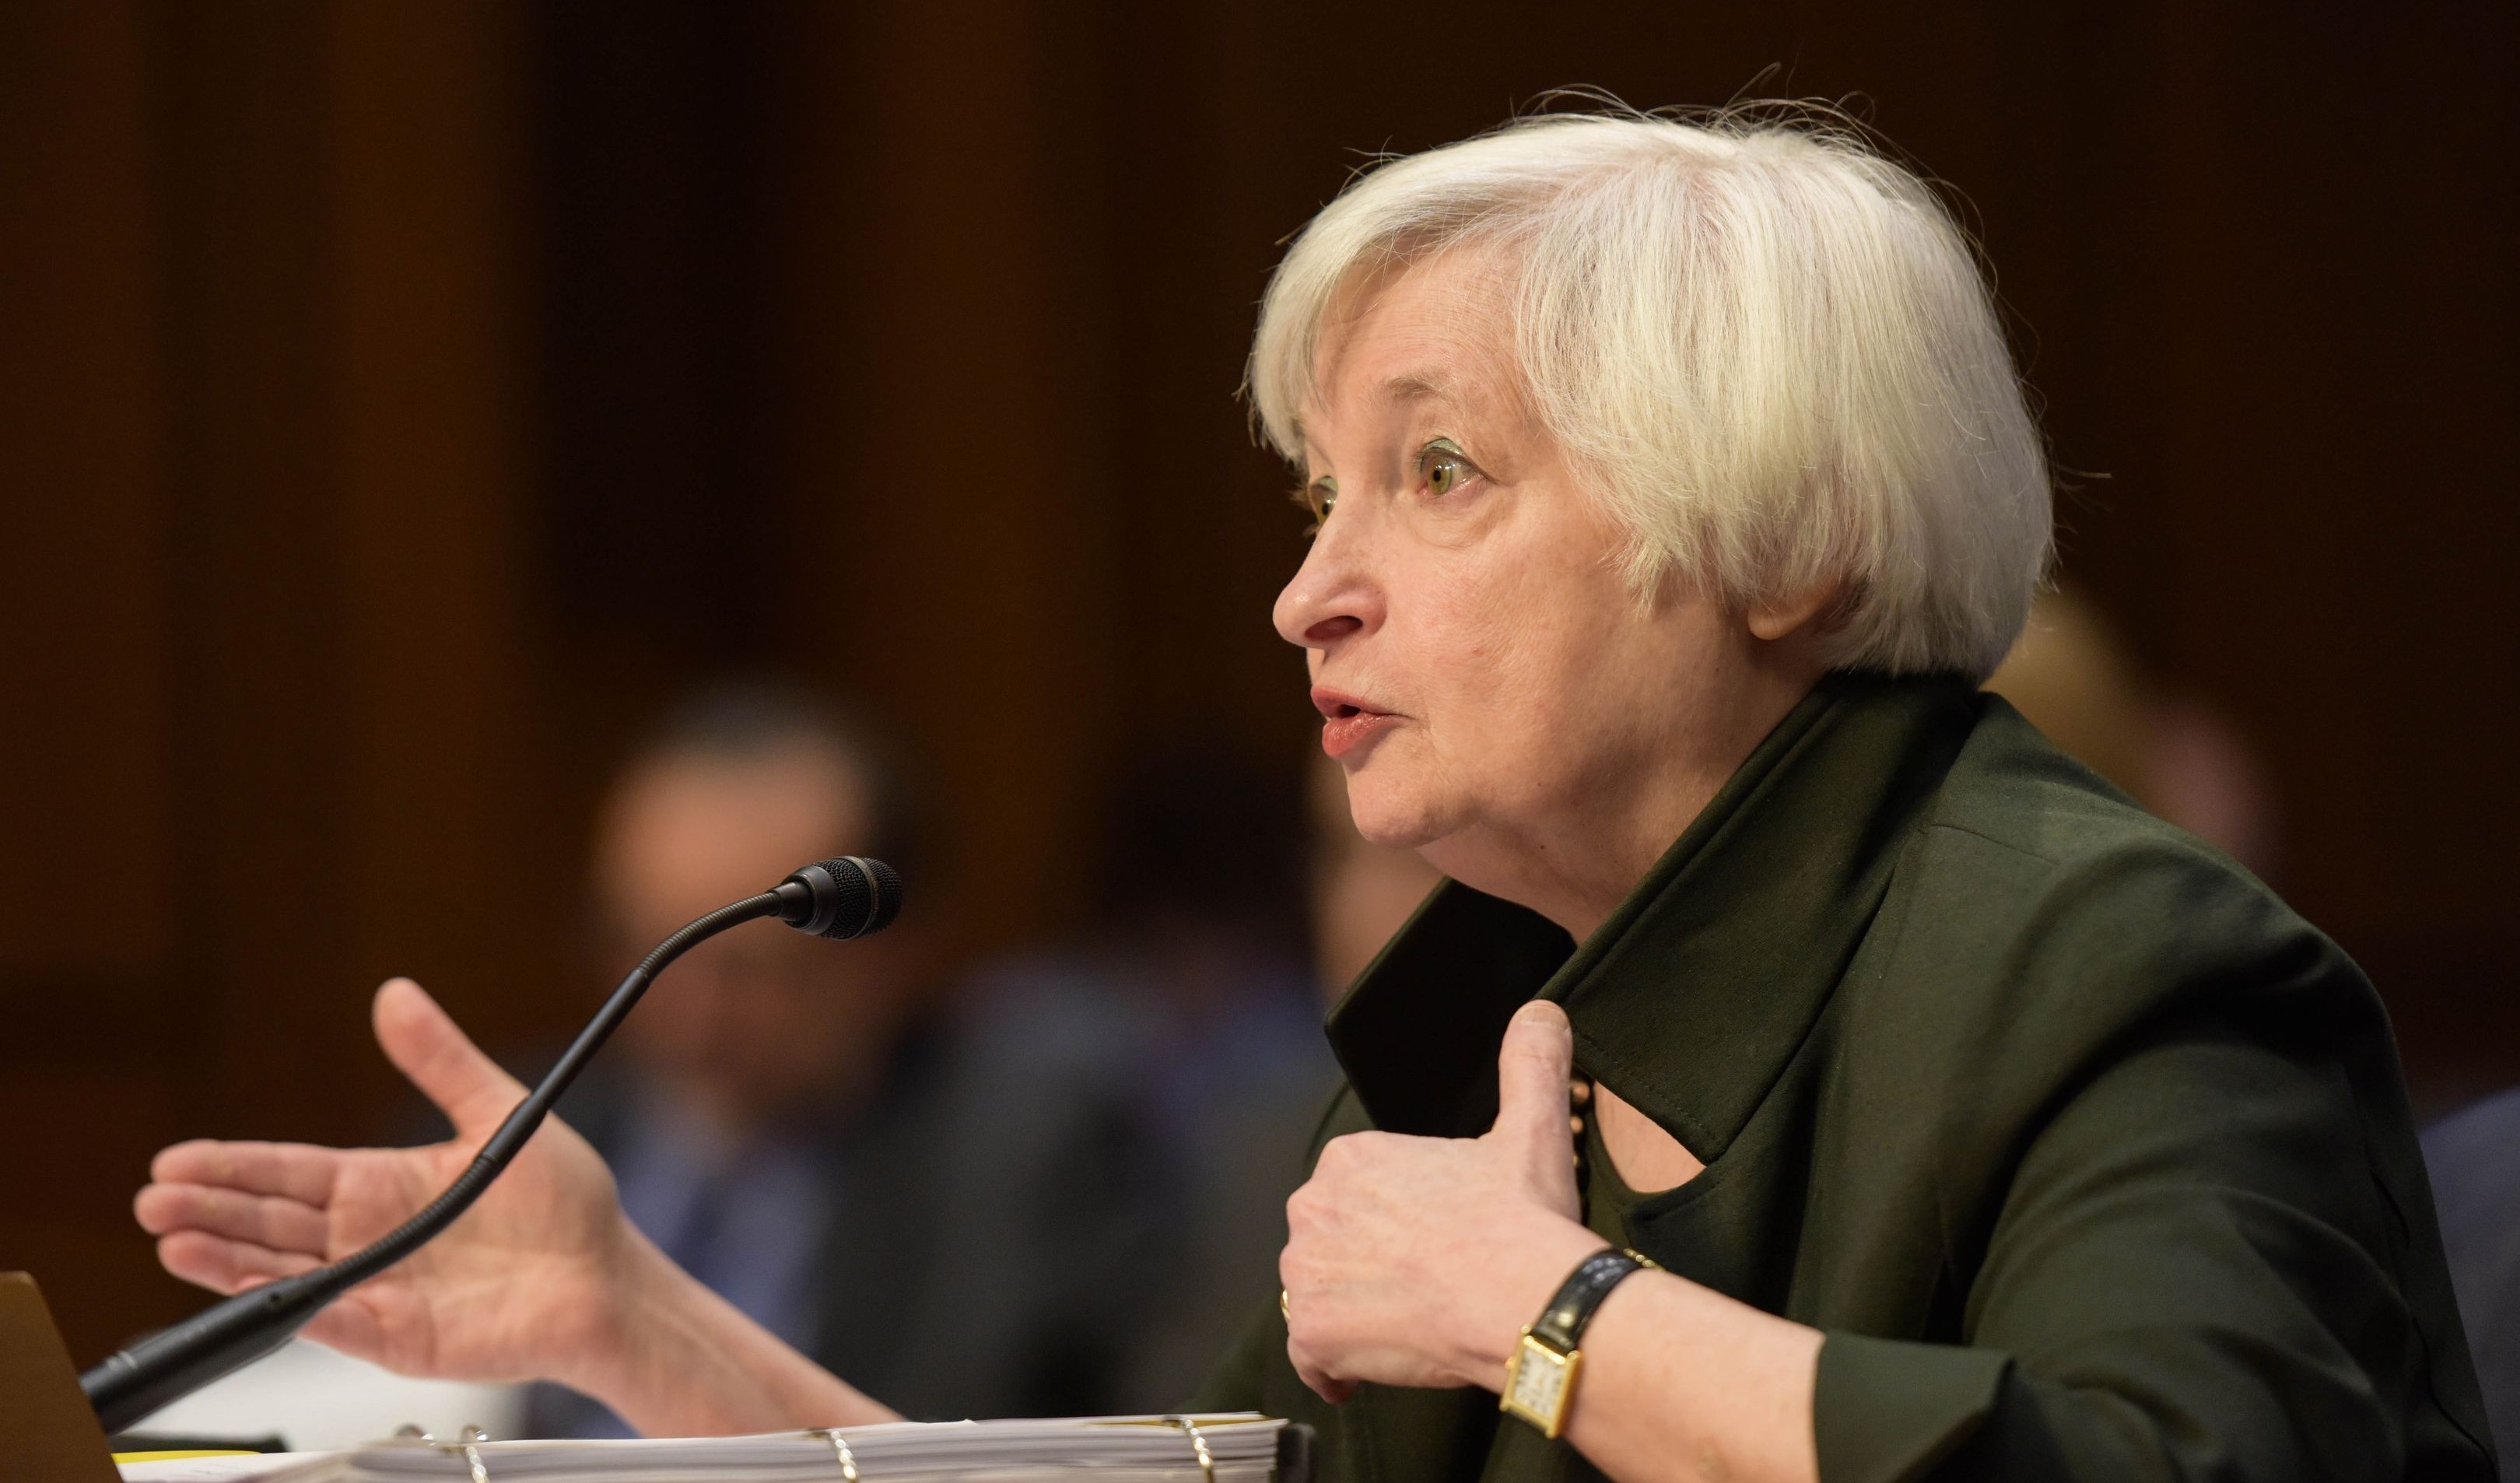 United States Secretary of the Treasury Yellen is presenting issue of debt crisis in America and suggests to raise the debt ceiling in order to avoid default